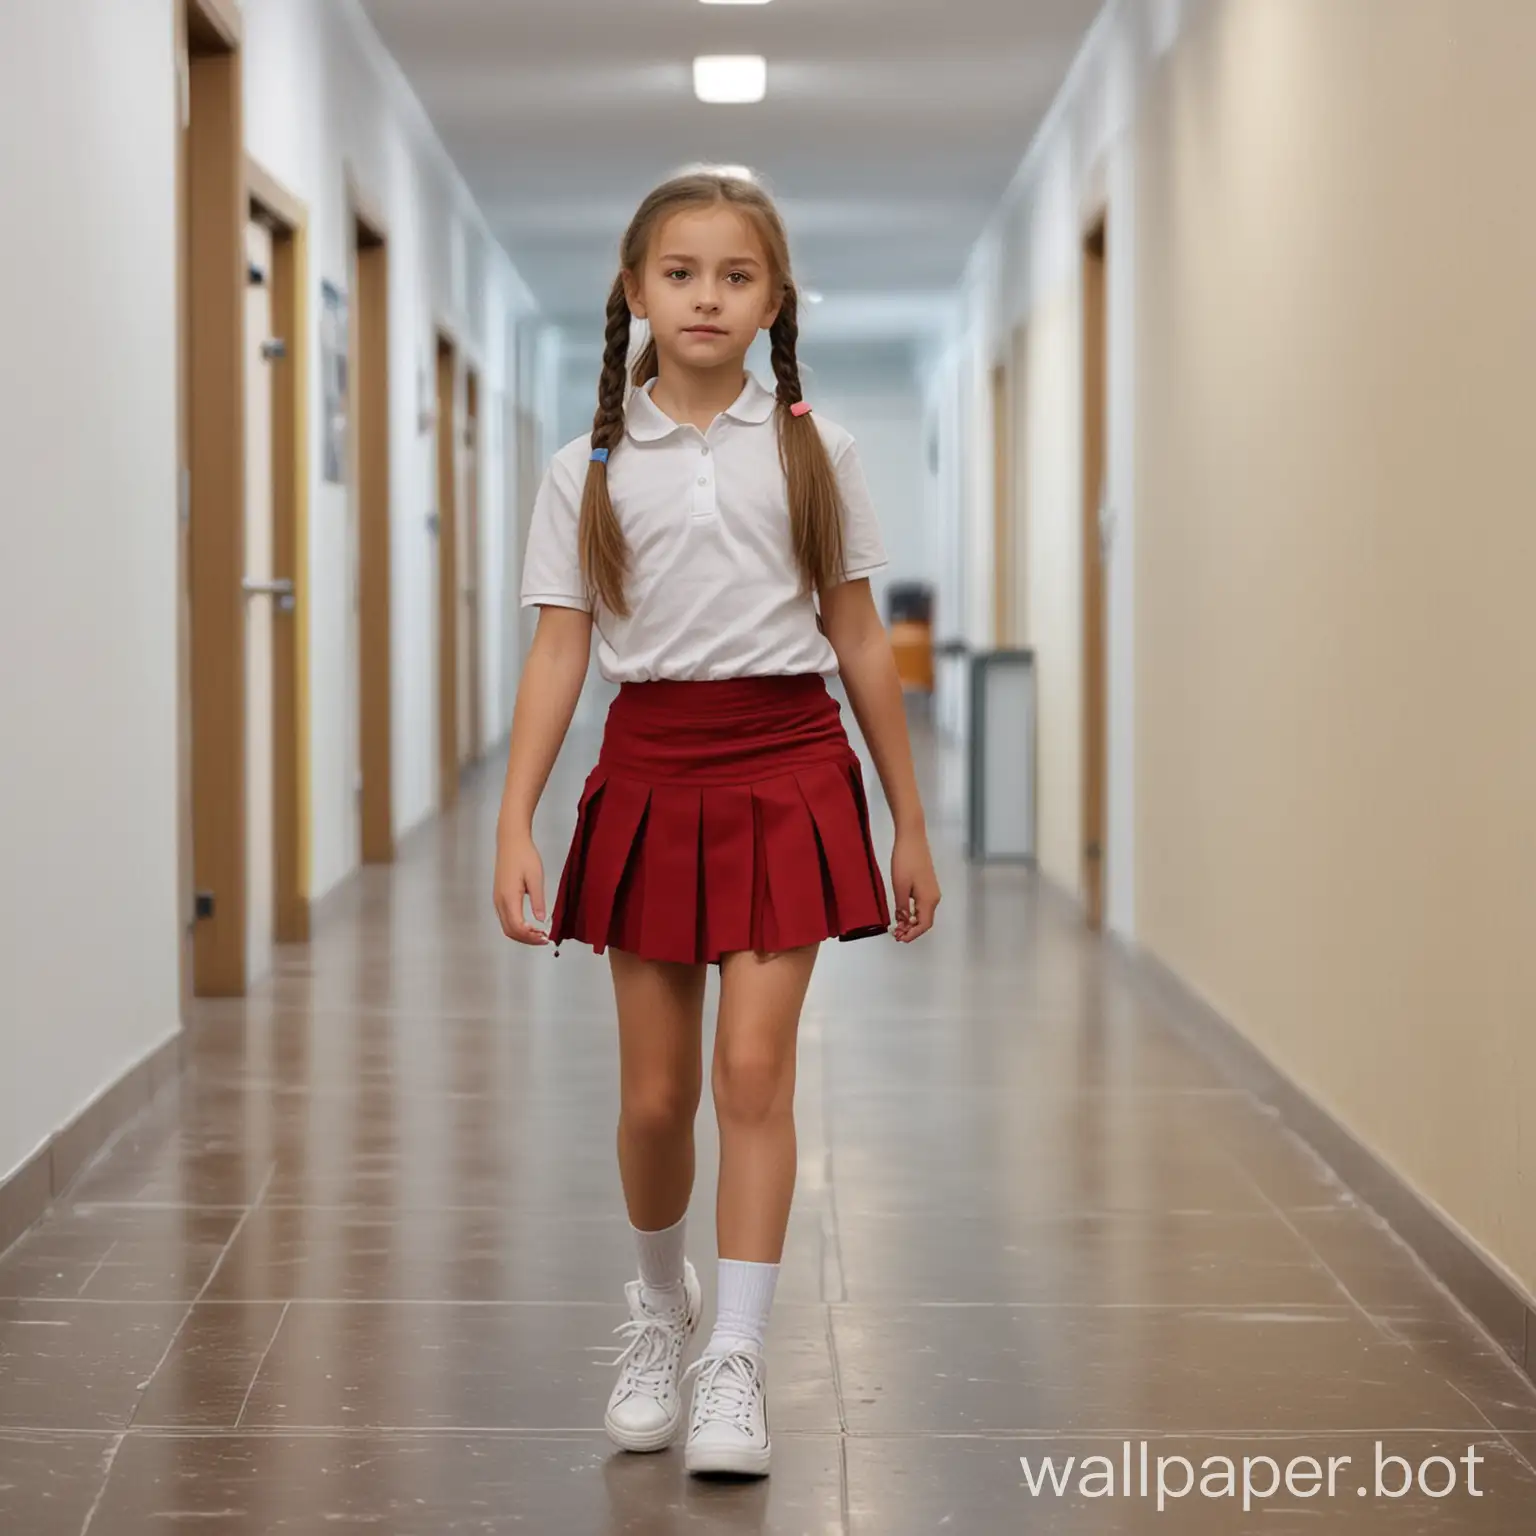 beautiful Russian girl 10-years-old in tennis shoes is walking in school hallway toward camera, full length, dynamic poses, front view, dynamics, she is wearing a mini-skirt